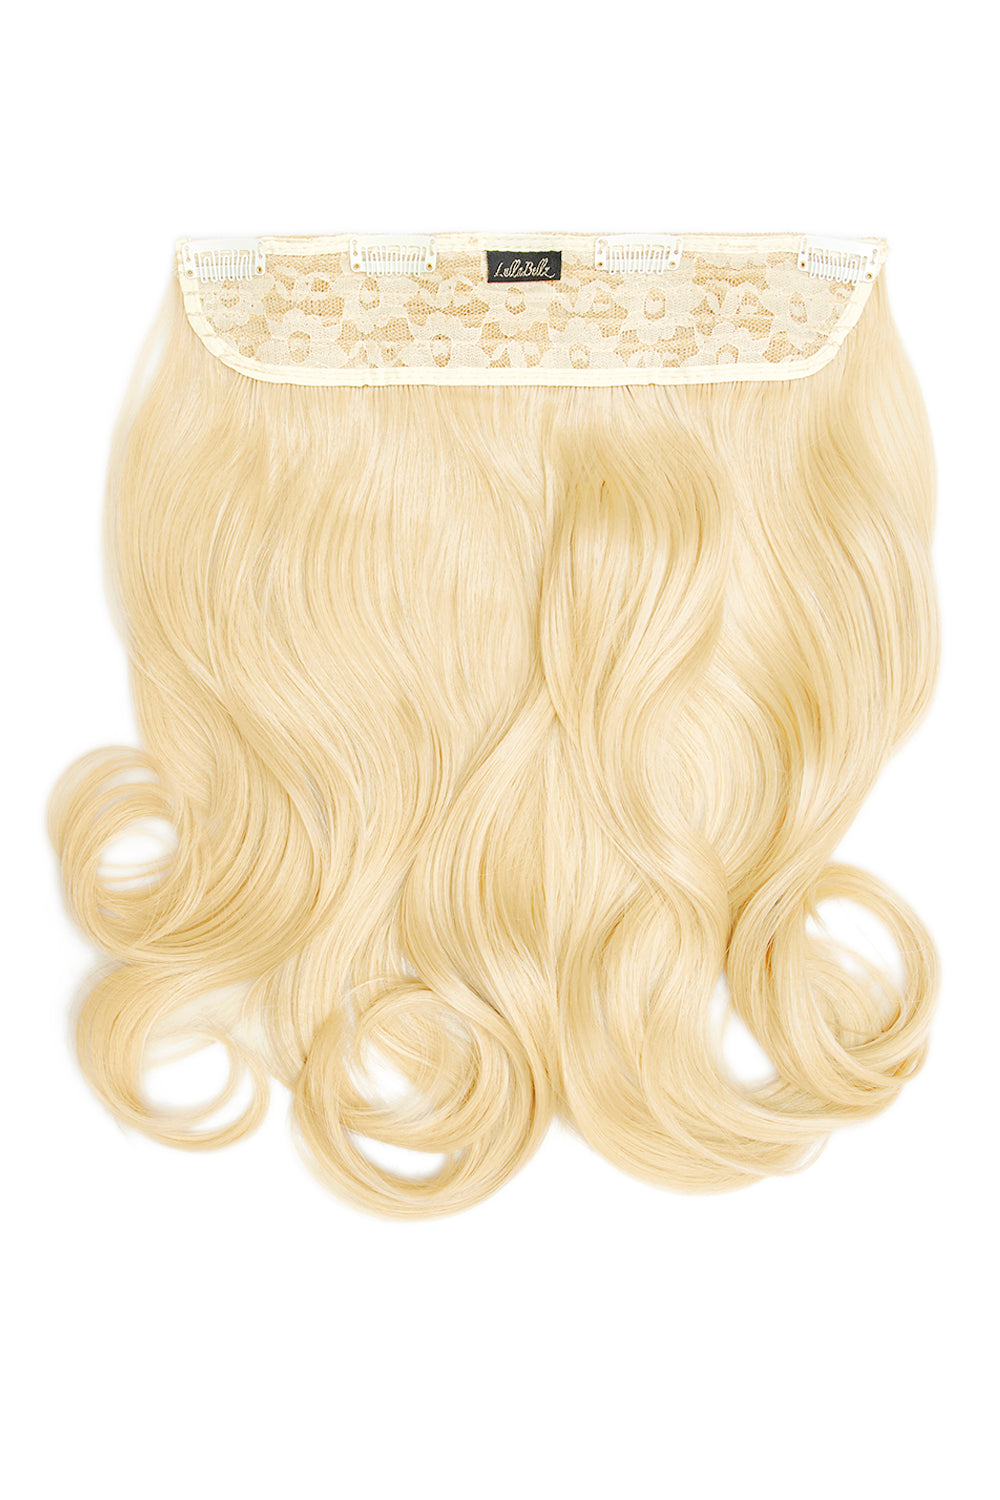 Thick 16" 1 Piece Curly Clip In Hair Extensions - LullaBellz - Pure Blonde